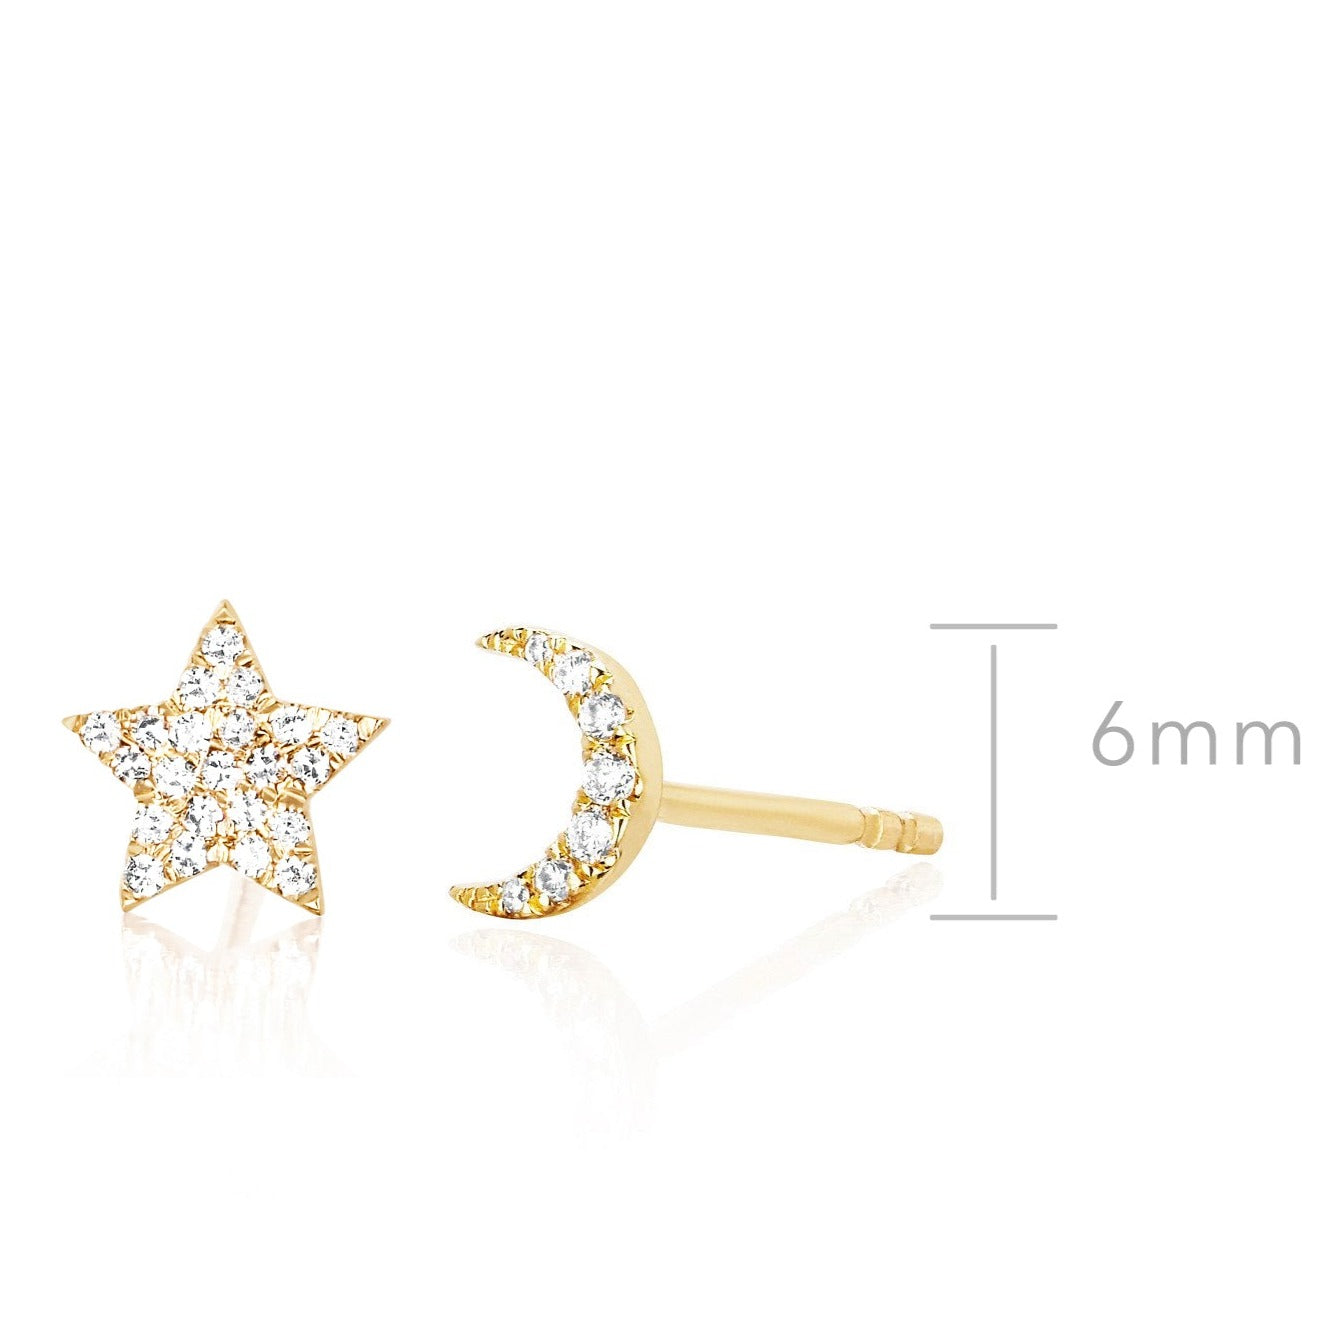 The Celestial Set in 14k Yellow Gold for Size Comparison